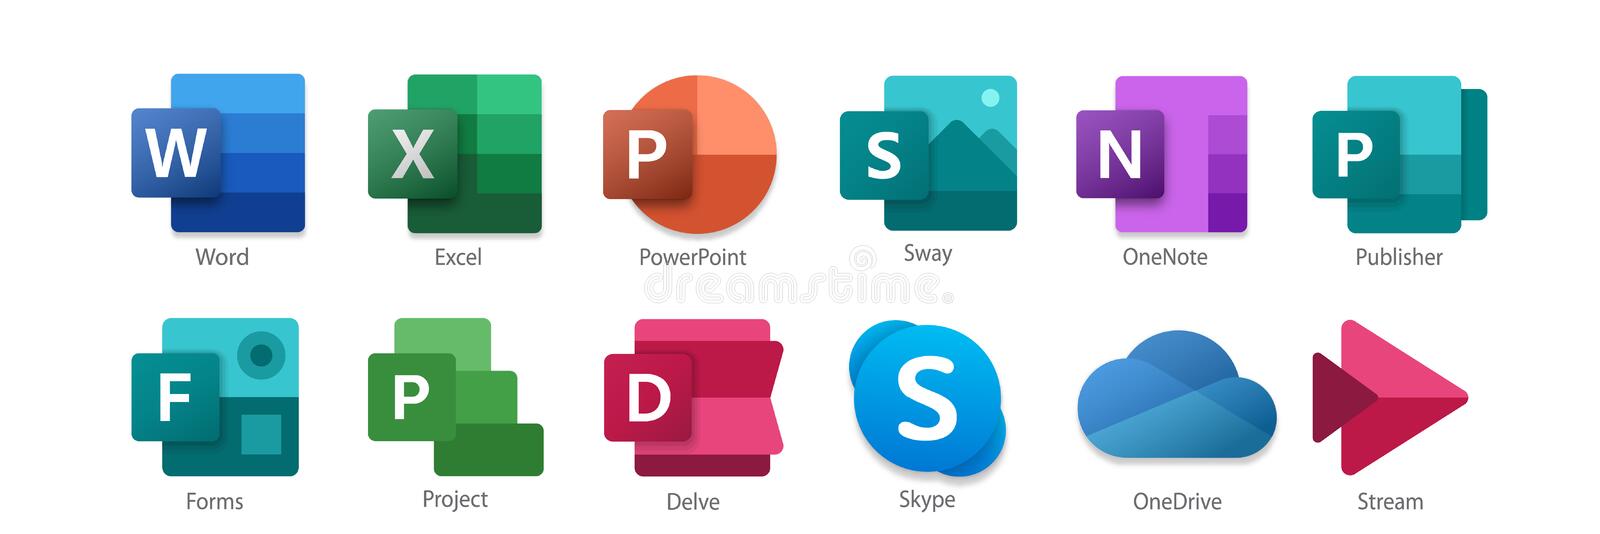 Microsoft Office contains plenty of applications